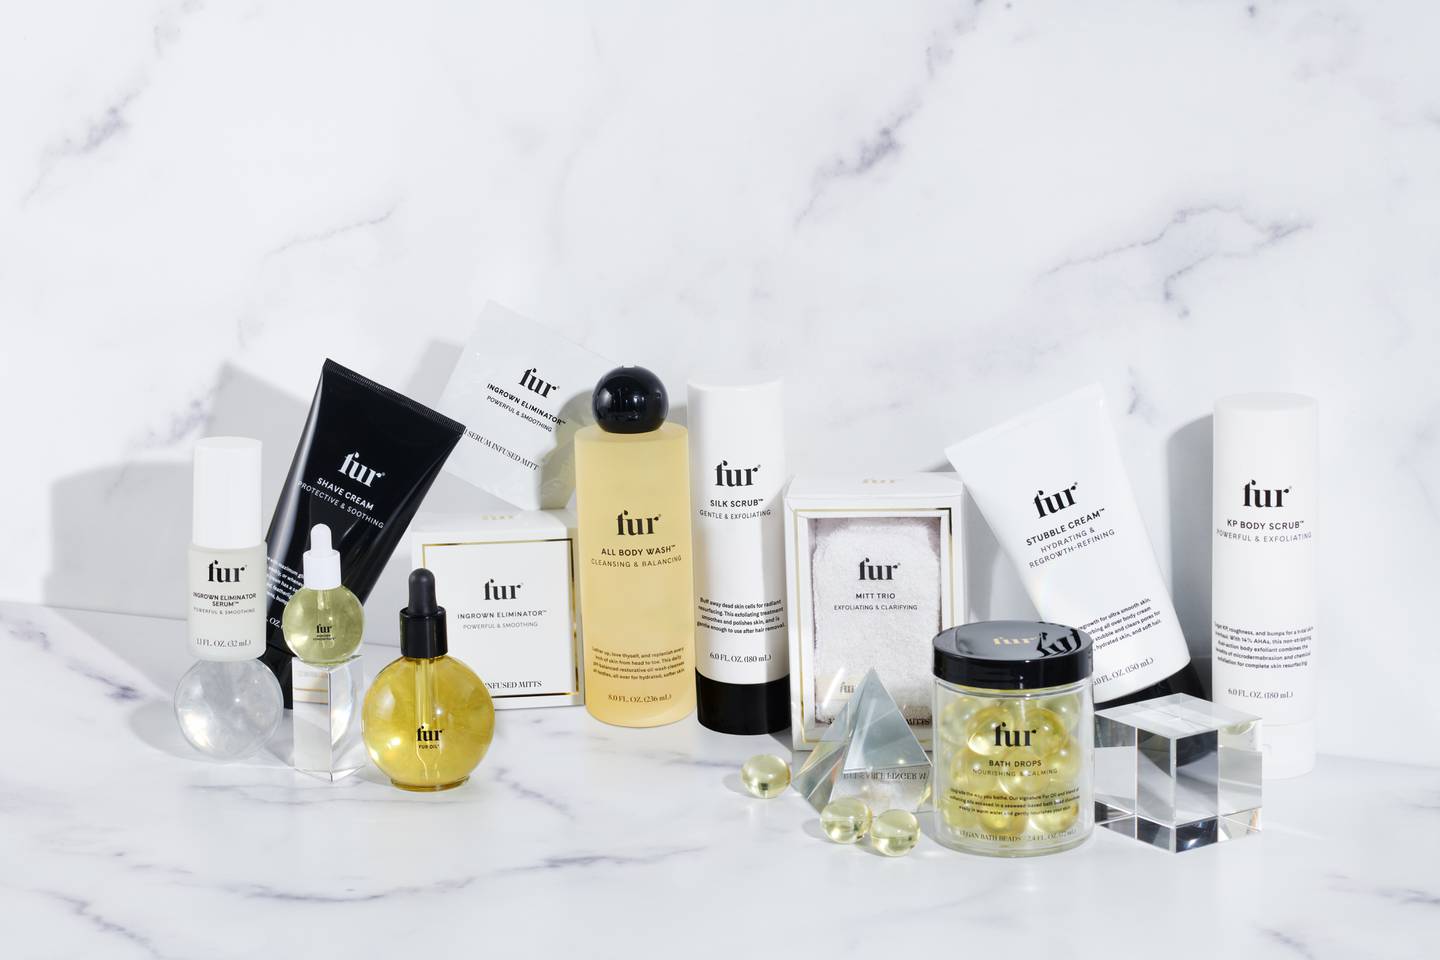 Fur makes a line-up of products including an ingrown elimnator serum and a body wash.